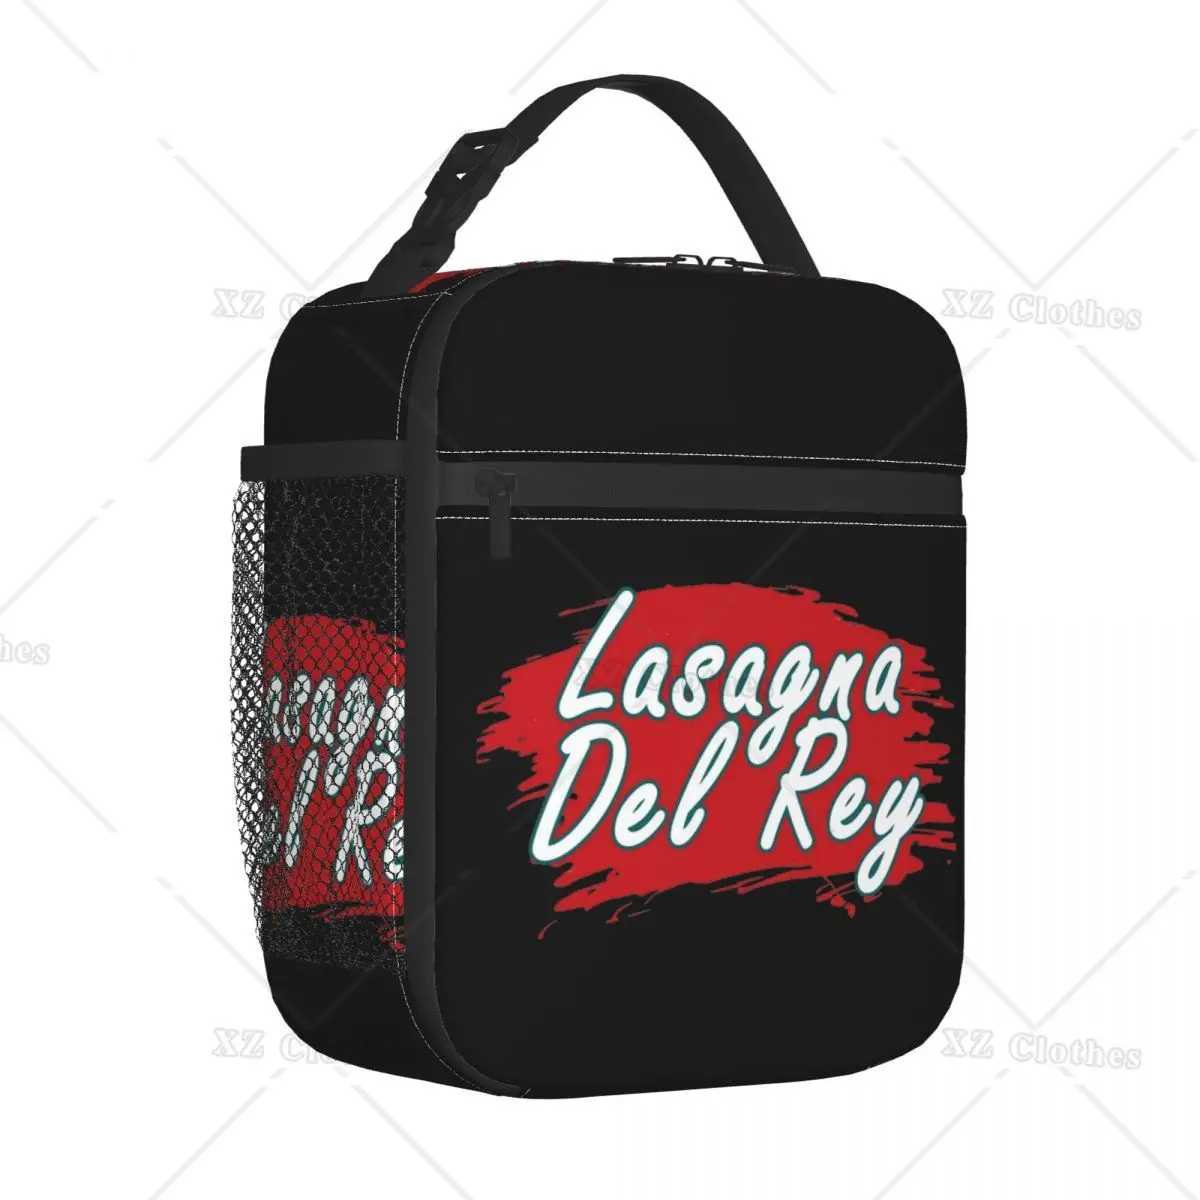 

Music Lana Del Rey Composer Funny Insulated Lunch Bags Thermal Bag Container Lunch Box with Pocket for Men Women Work Picnic